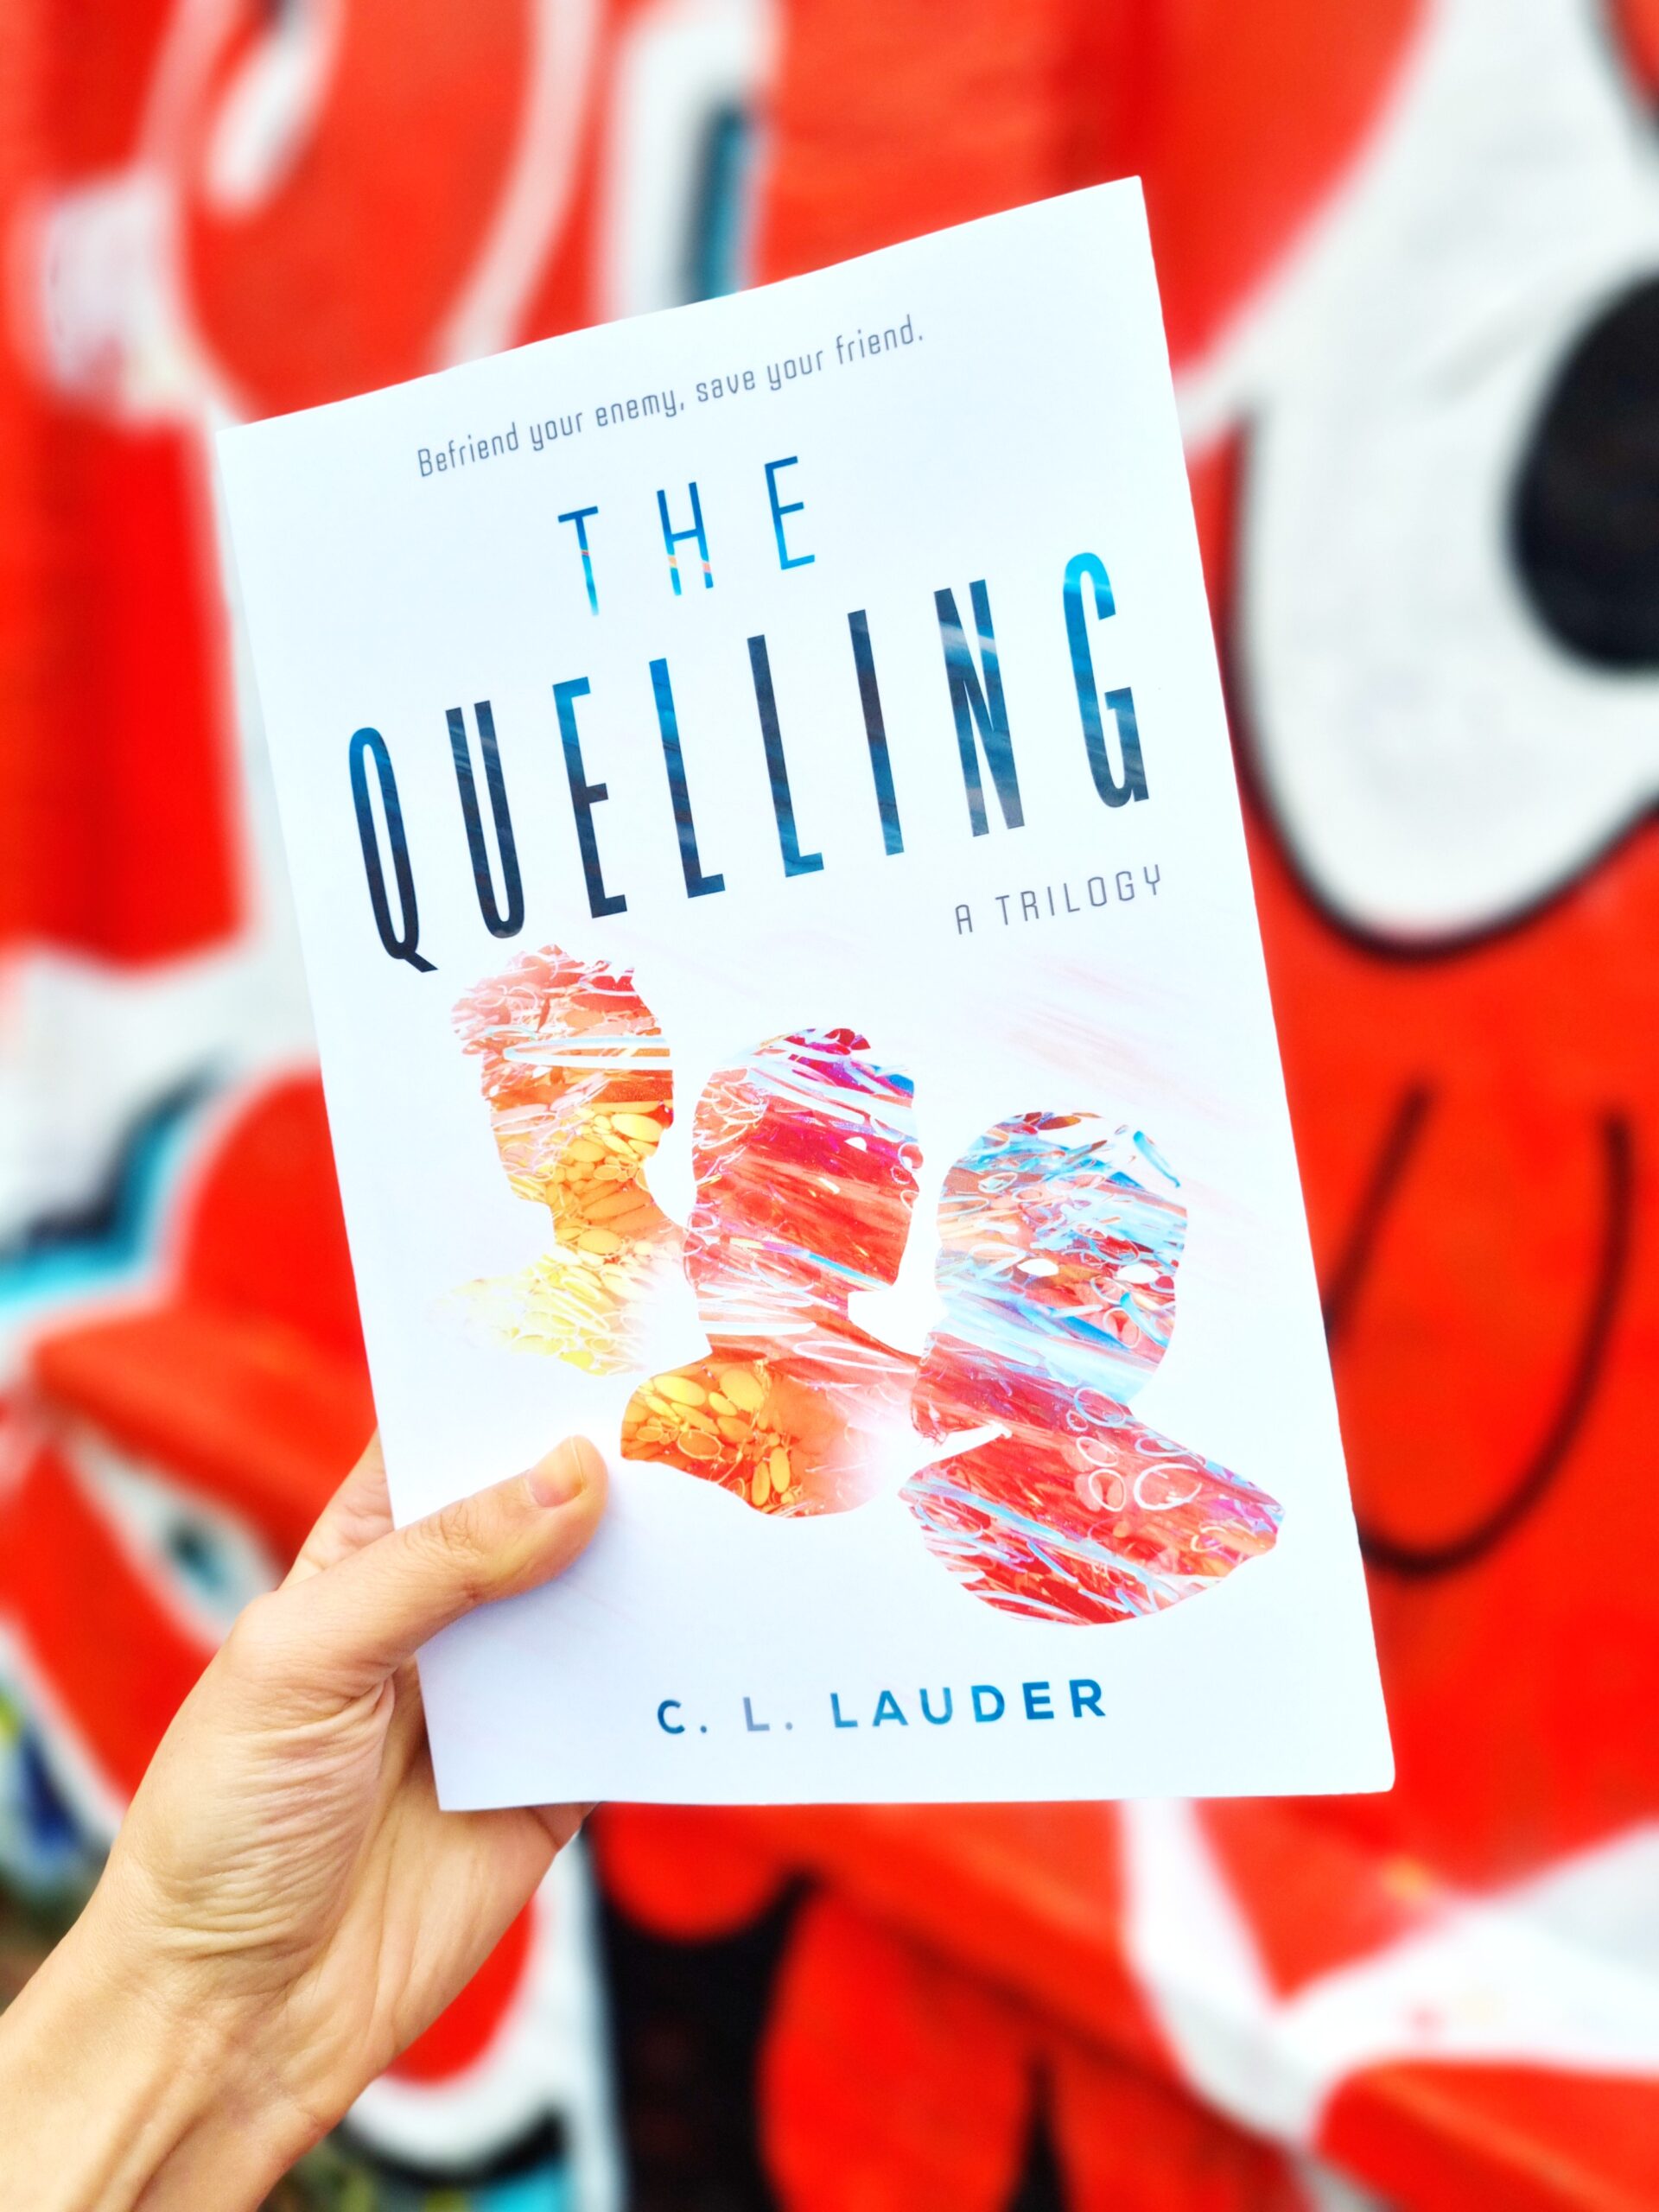 <img src="the quelling.jpg" alt="the quelling book one"/>